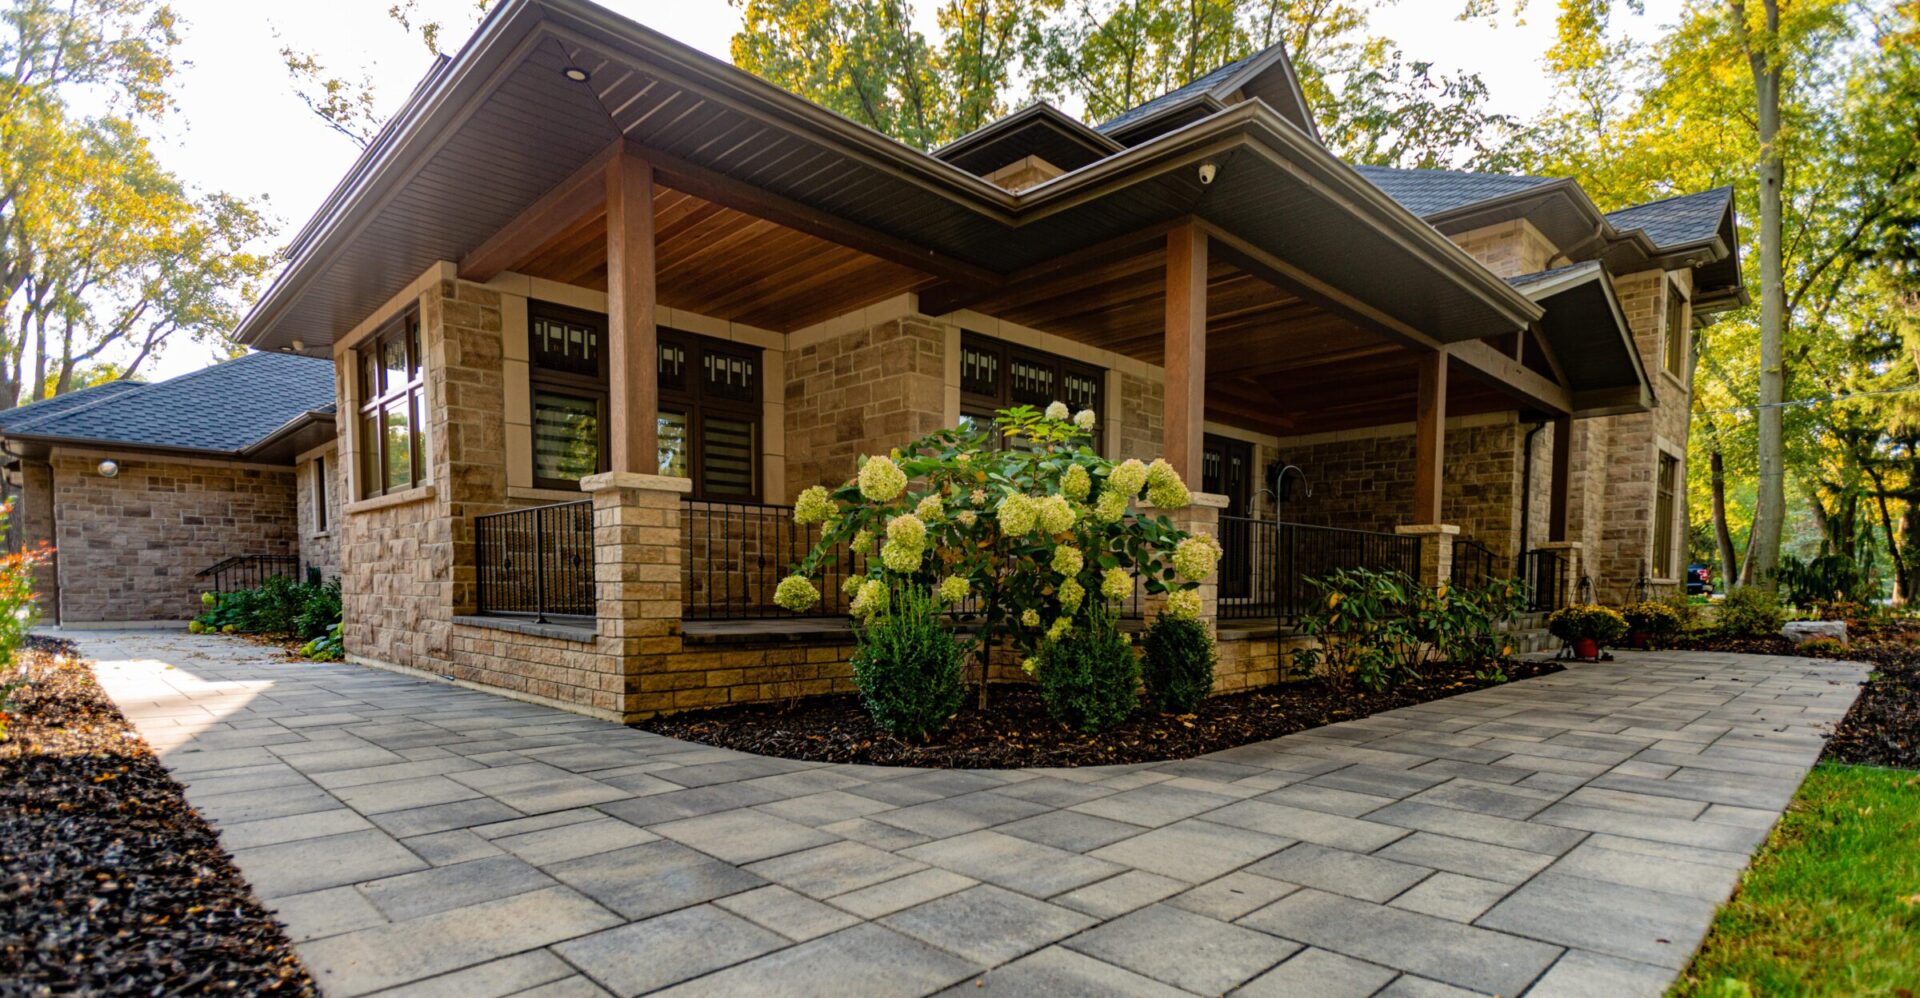 This is an image of a modern house with a large porch, stone pillars, landscaped garden, hydrangea bushes, and a paved walkway, surrounded by trees.